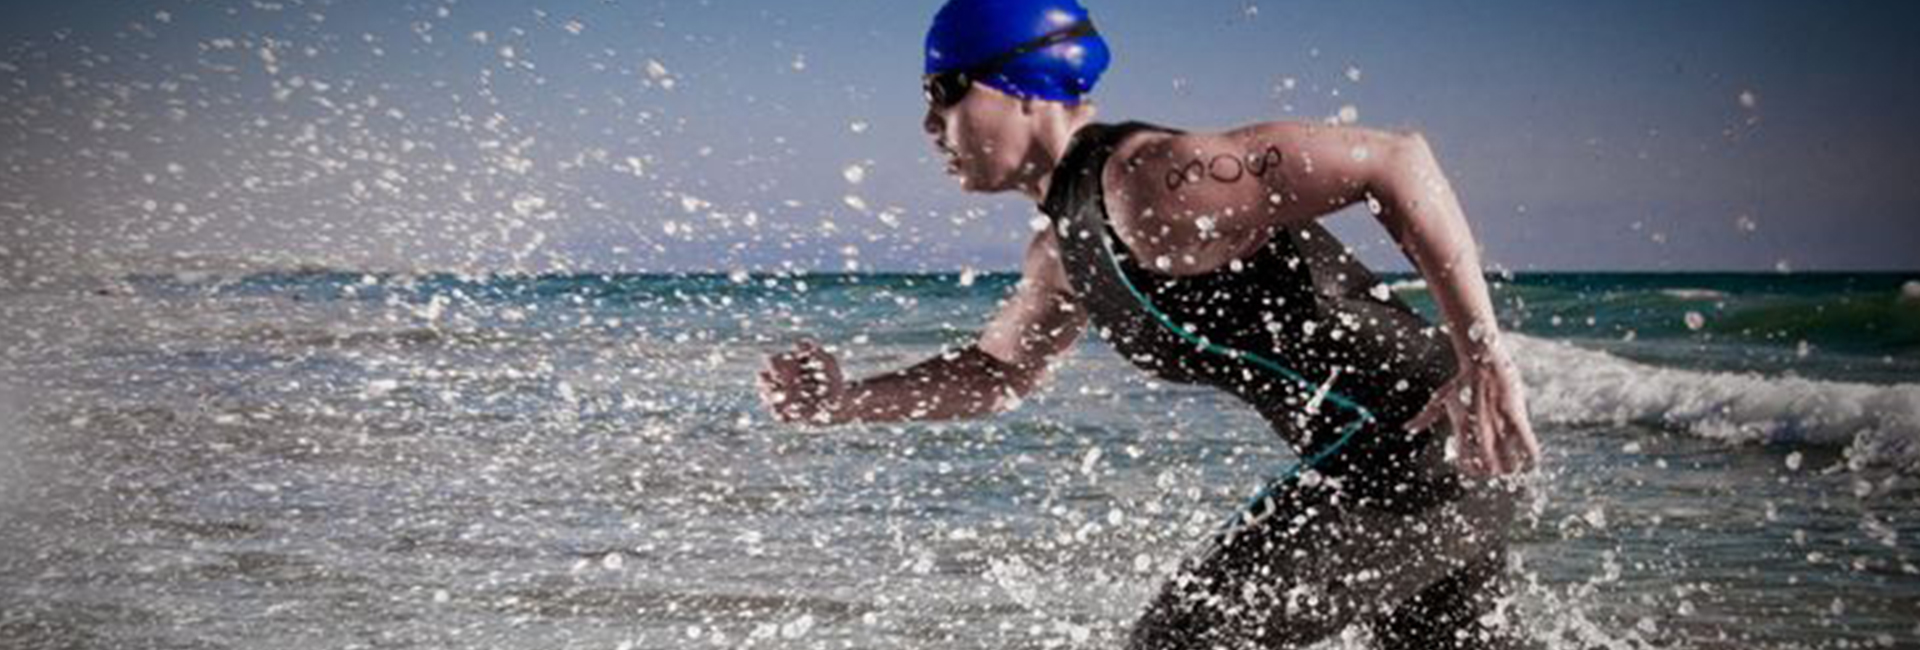 Athlete swimmer running through the water to begin the race